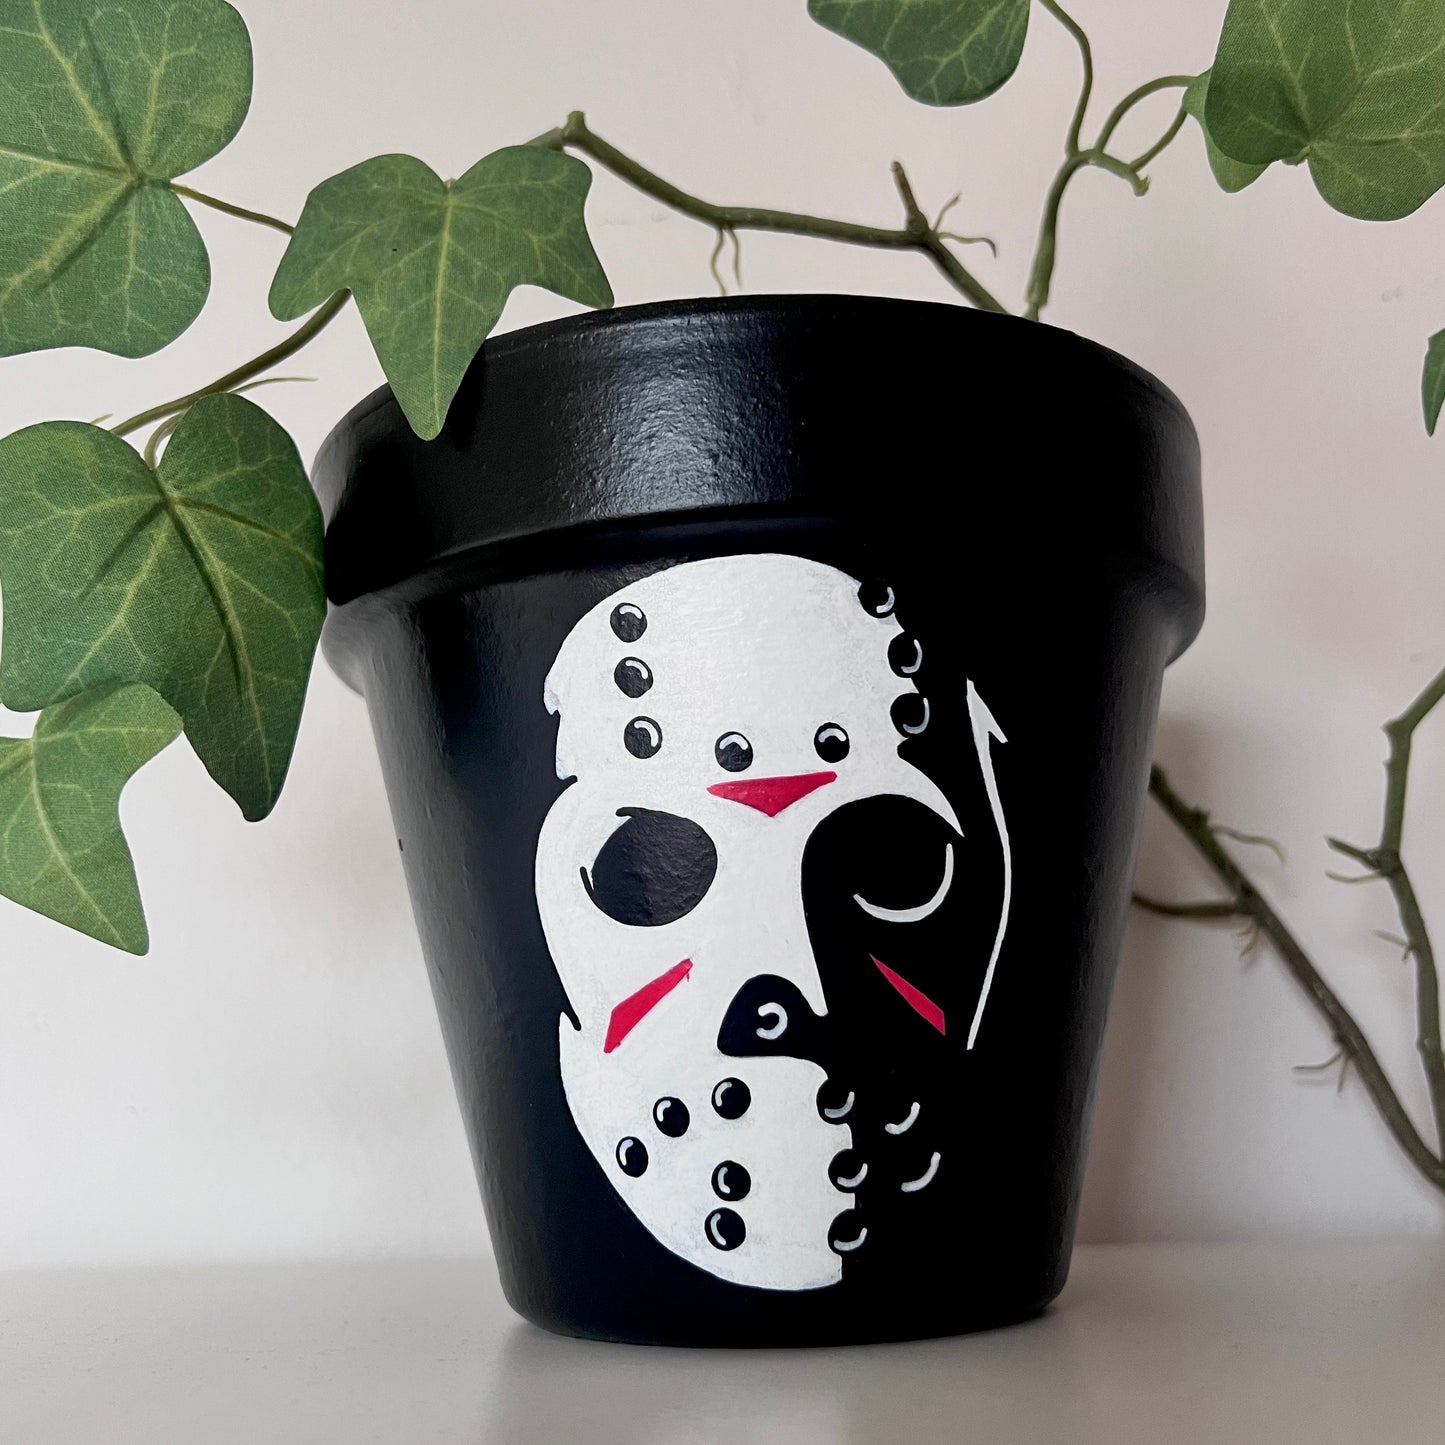 Jason Voorhees / Friday the 13th Hand Painted Plant Pot - 15cn